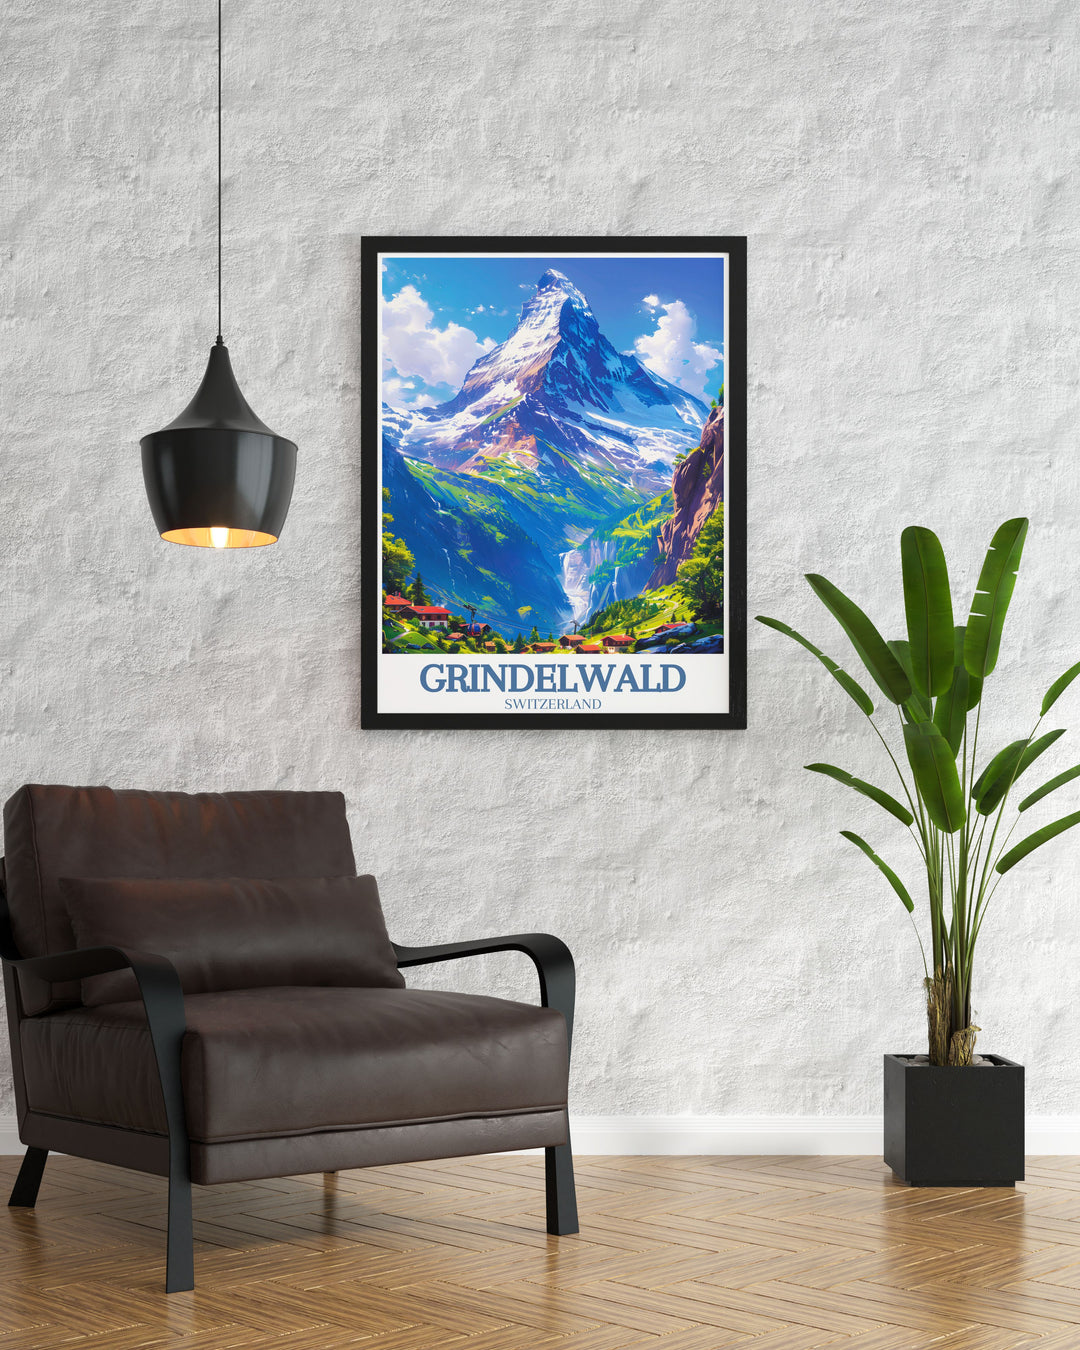 A captivating travel poster of Eiger mountain Grindelwald First featuring breathtaking views of the Swiss Alps. This Grindelwald First poster is ideal for adding a touch of elegance to your home decor with its vibrant illustration.